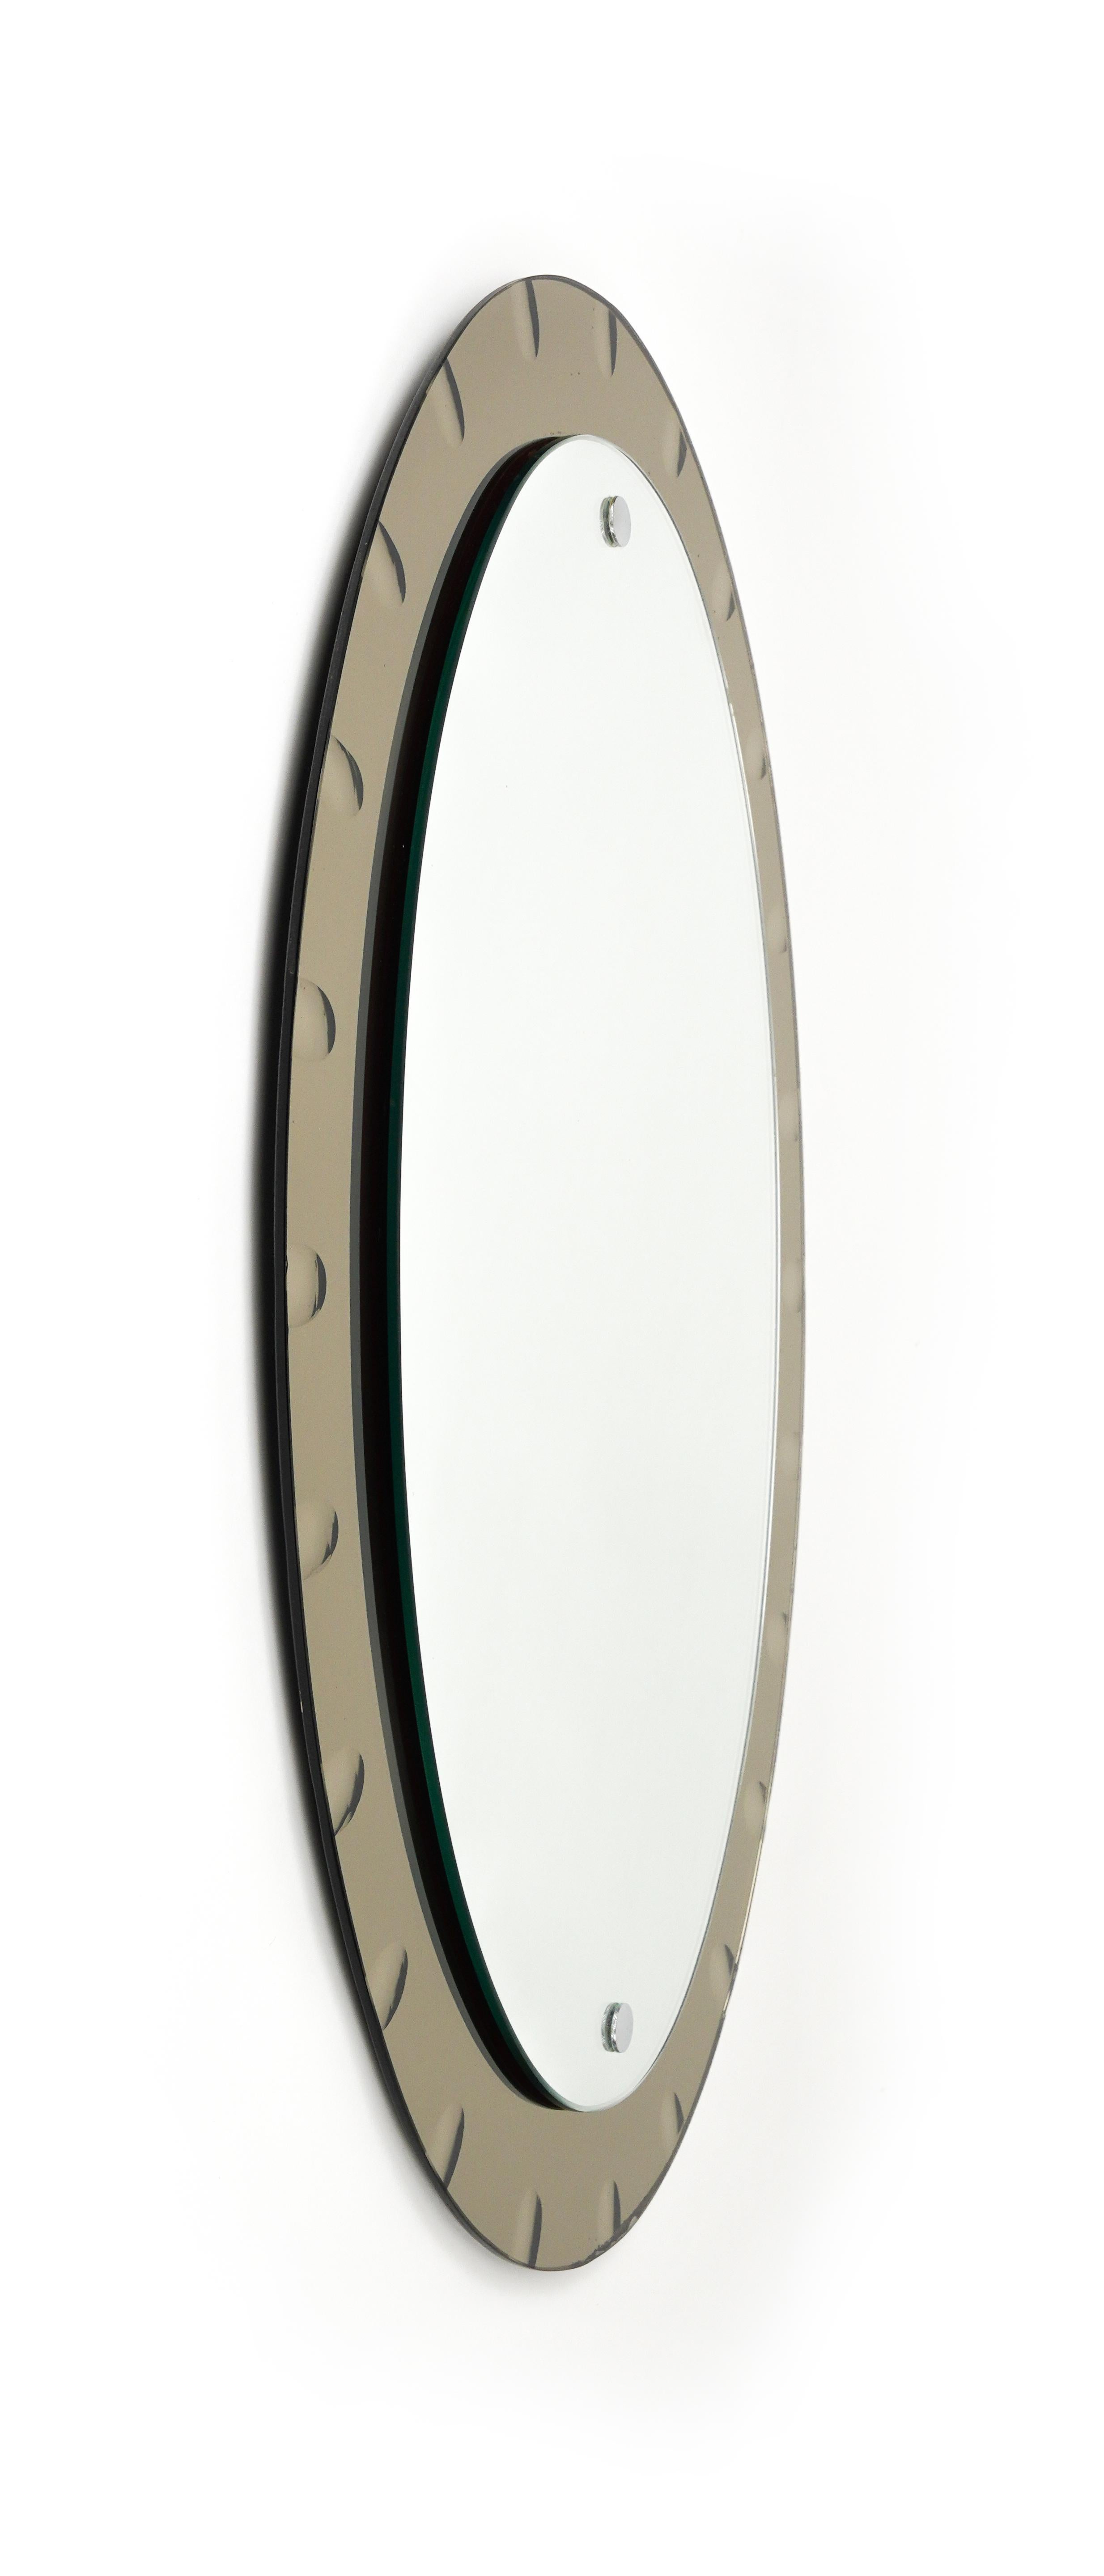 Italian Midcentury Oval Wall Mirror with Bronzed Frame by Cristal Arte, Italy 1960s For Sale